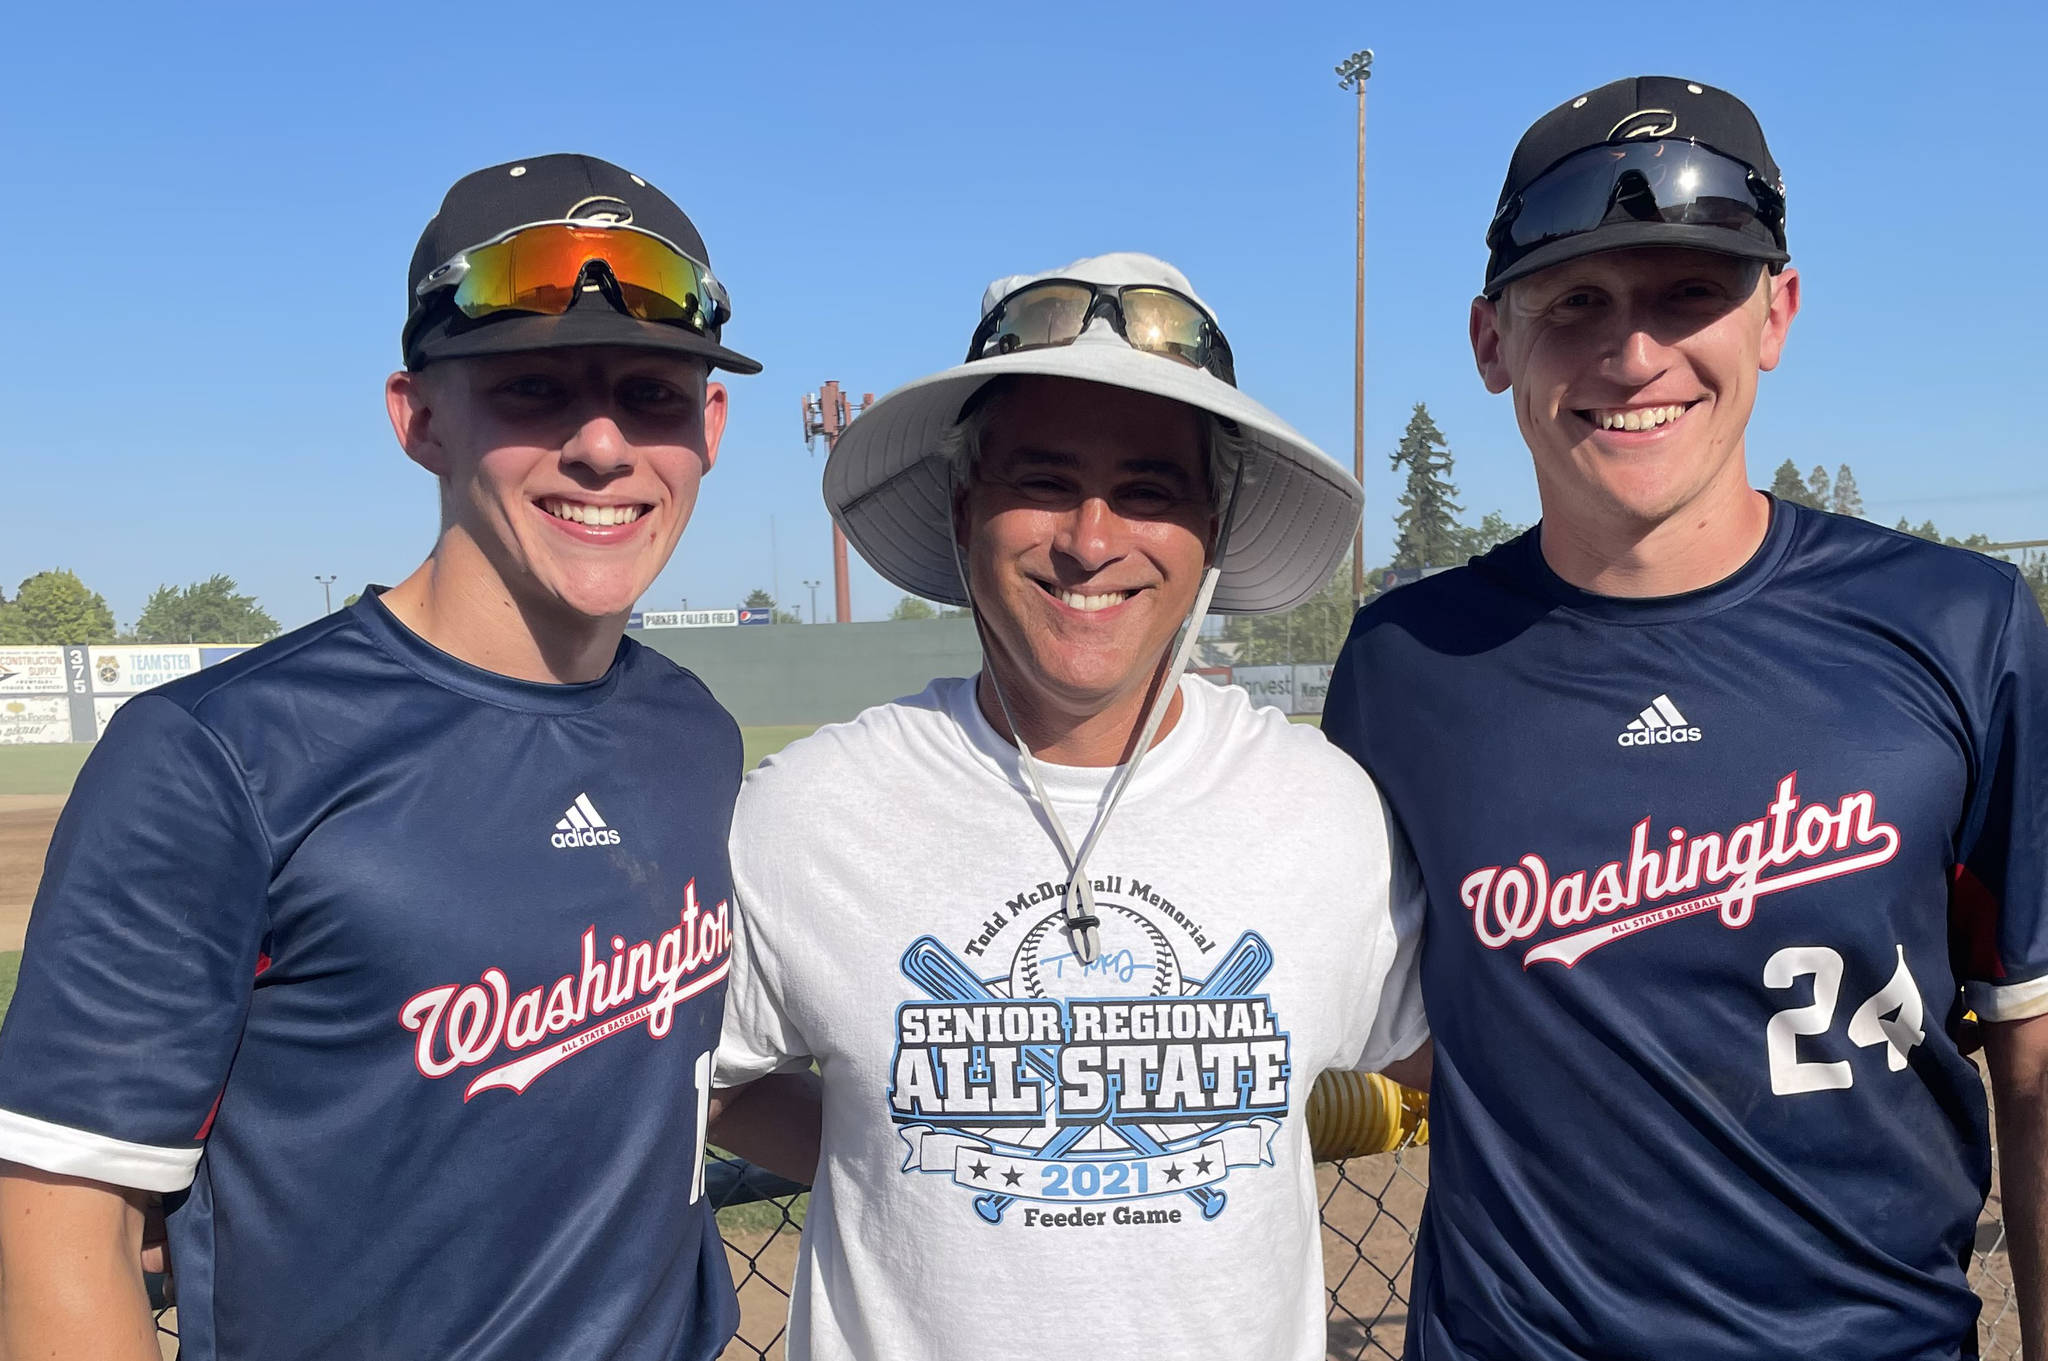 SUBMITTED PHOTO
During the All-State baseball series, Enumclaw High coach Eric Fiedler is flanked by his former players Cole Kaschmitter and Kaden Loop.